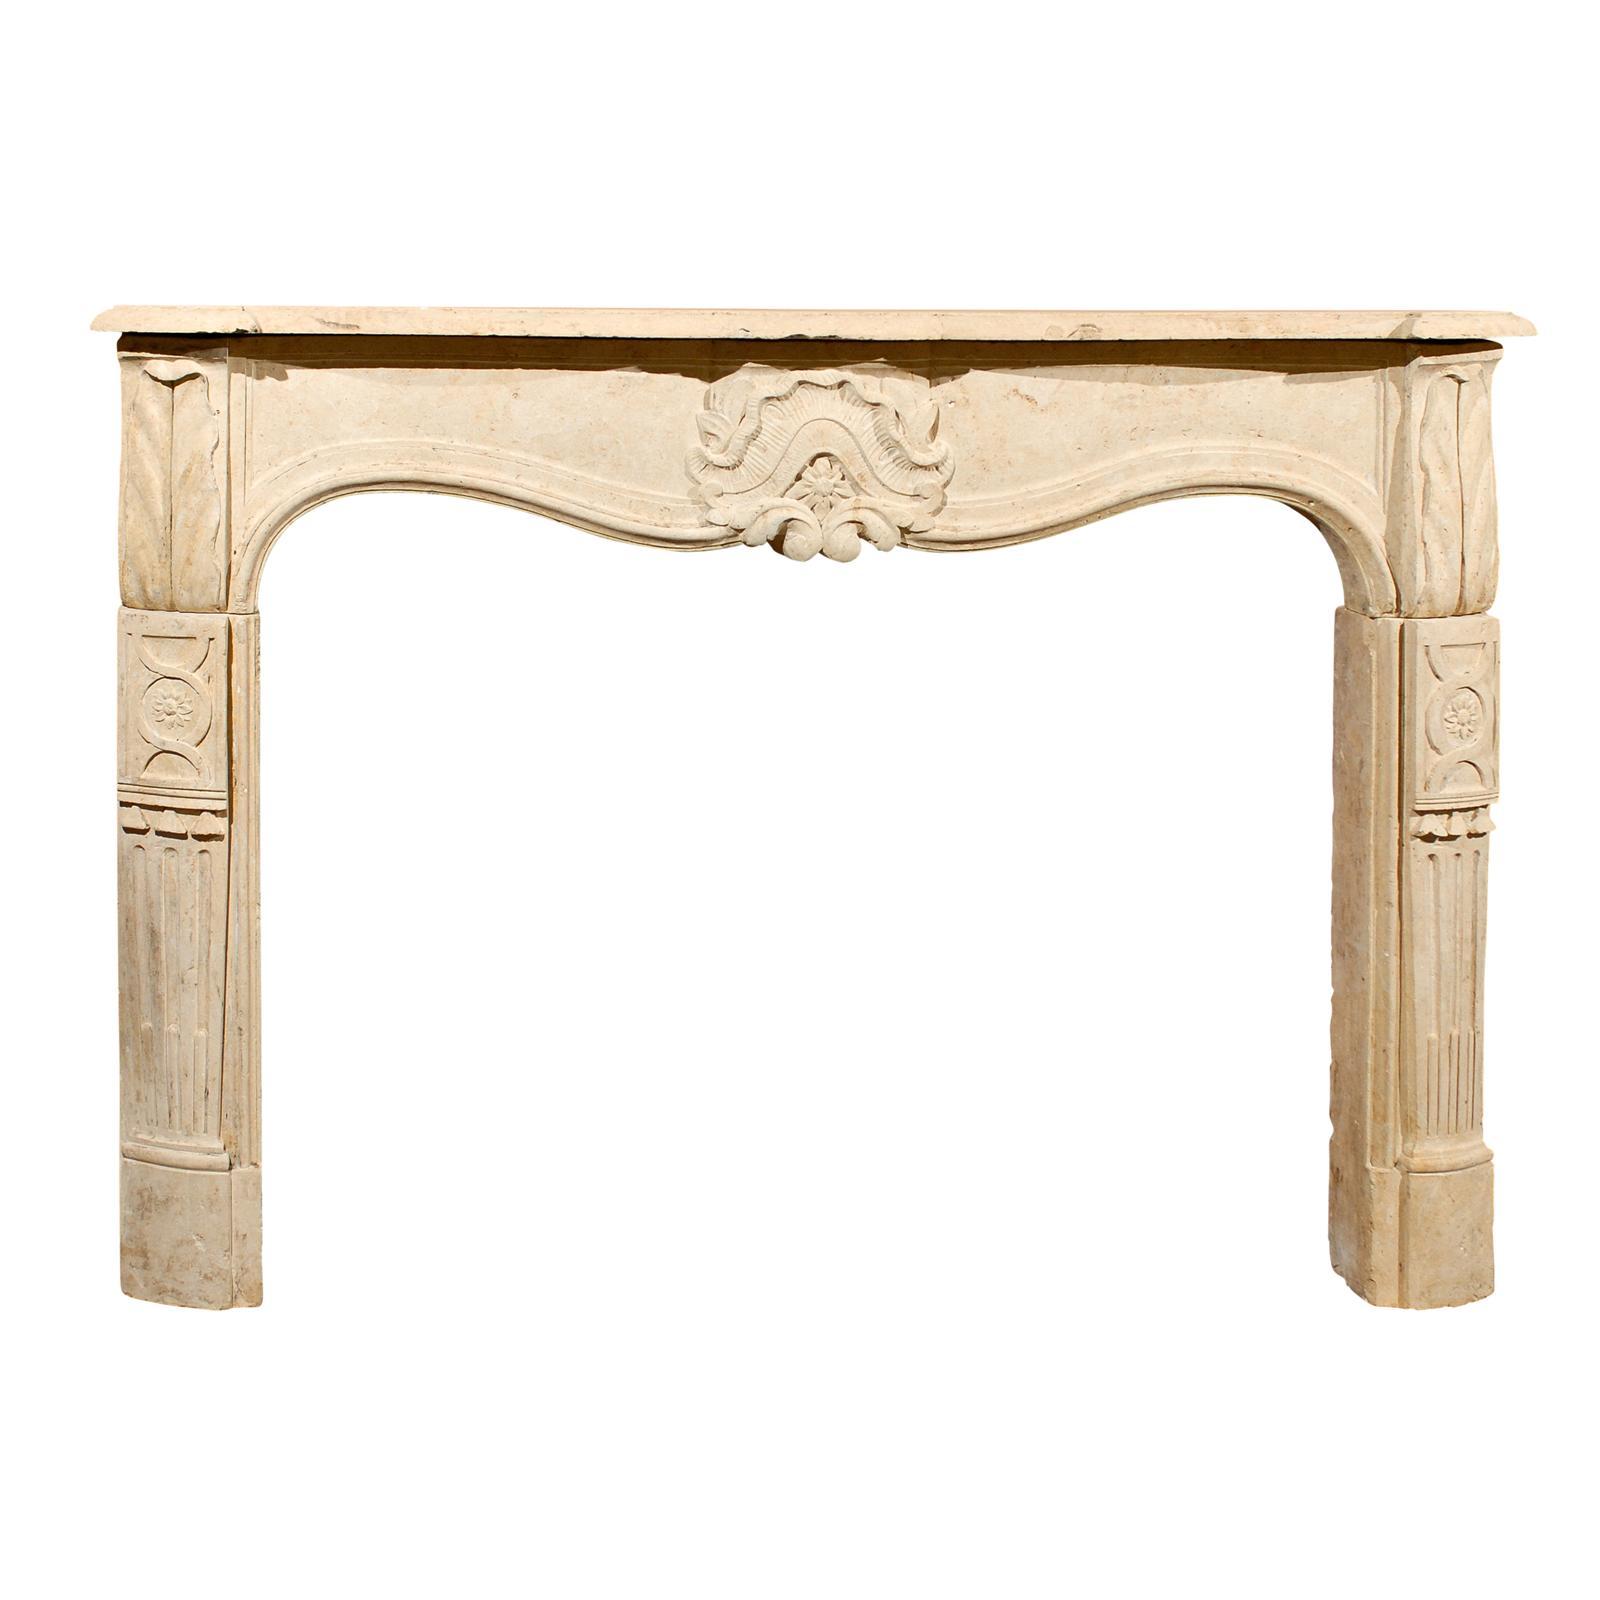 Rare 18th Century French Carved Limestone Mantel with Exceptional Details For Sale